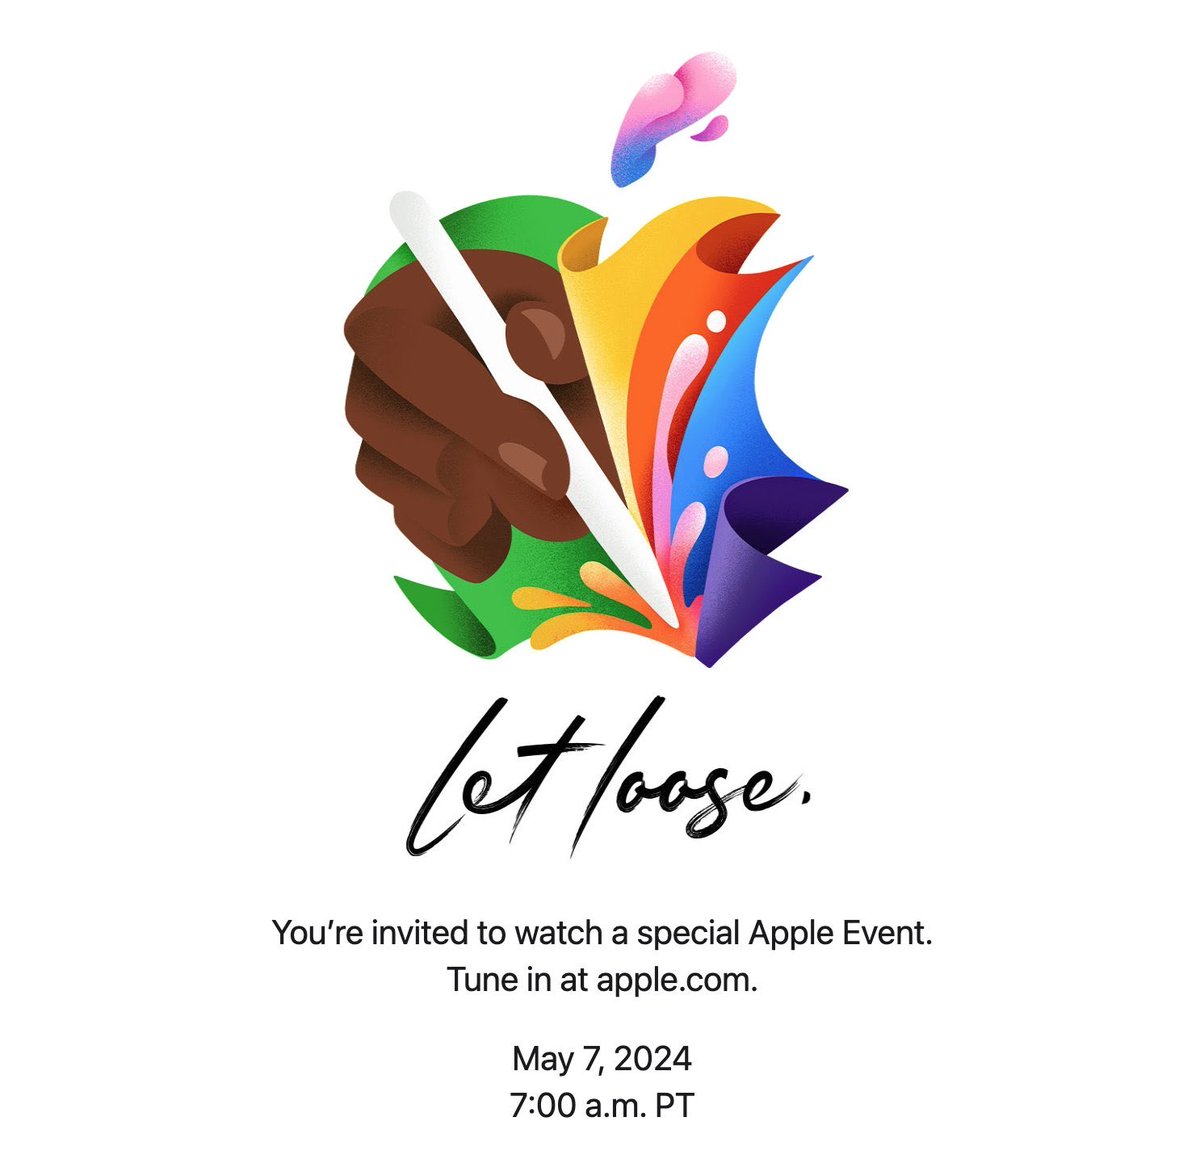 Apple event on May 7, 10am ET is official! “Let Loose” tagline with an Apple Pencil in the invite. Time for iPads!